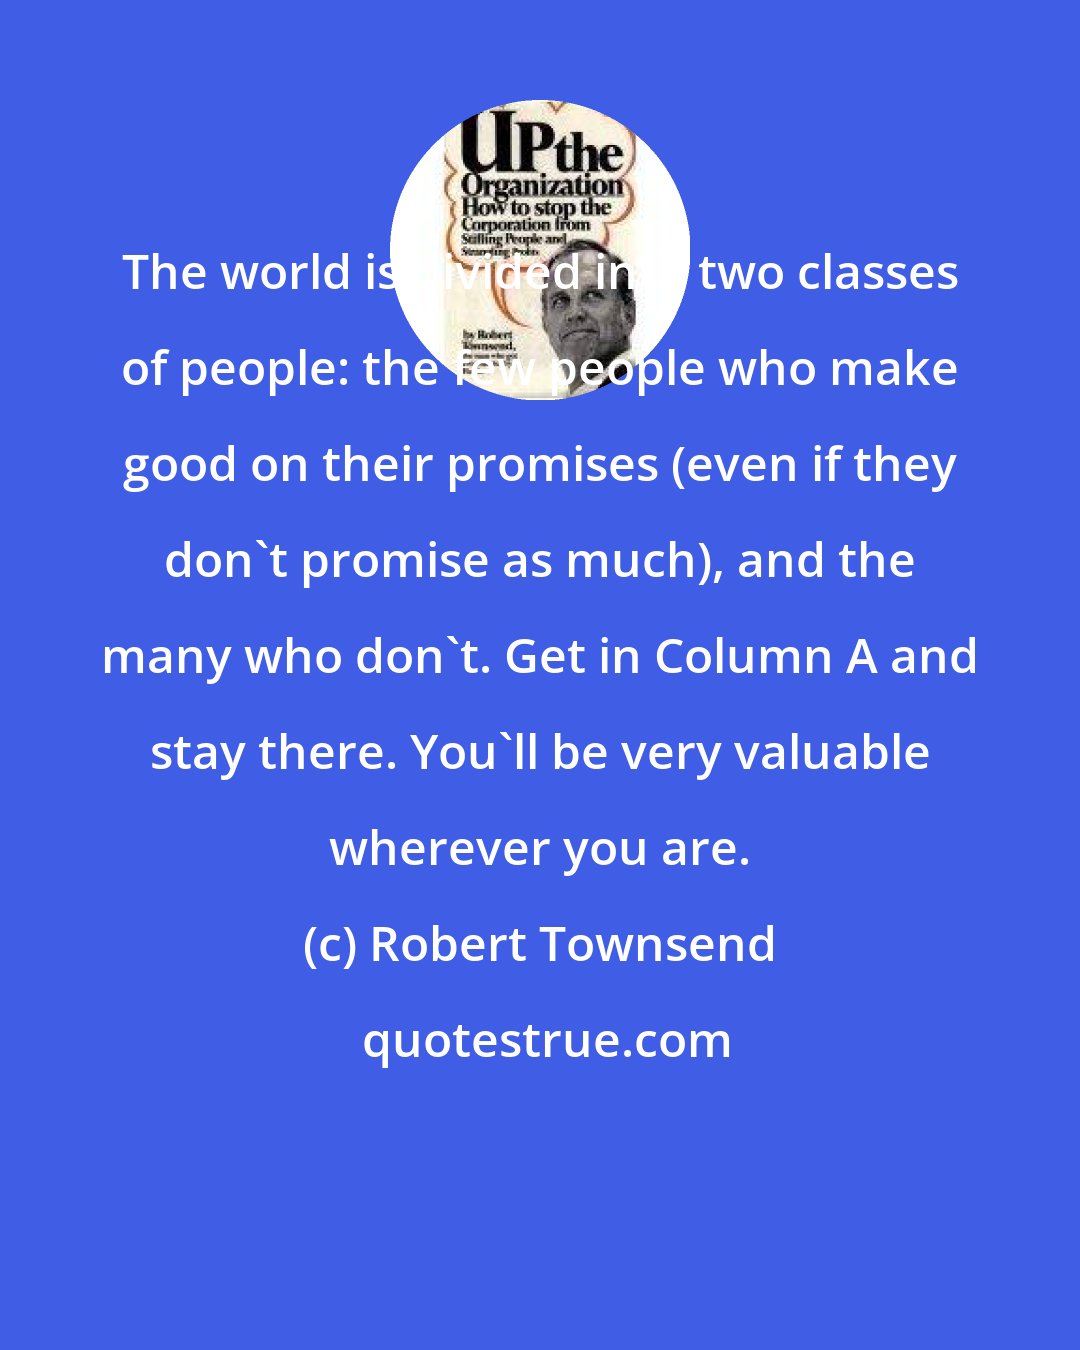 Robert Townsend: The world is divided into two classes of people: the few people who make good on their promises (even if they don't promise as much), and the many who don't. Get in Column A and stay there. You'll be very valuable wherever you are.